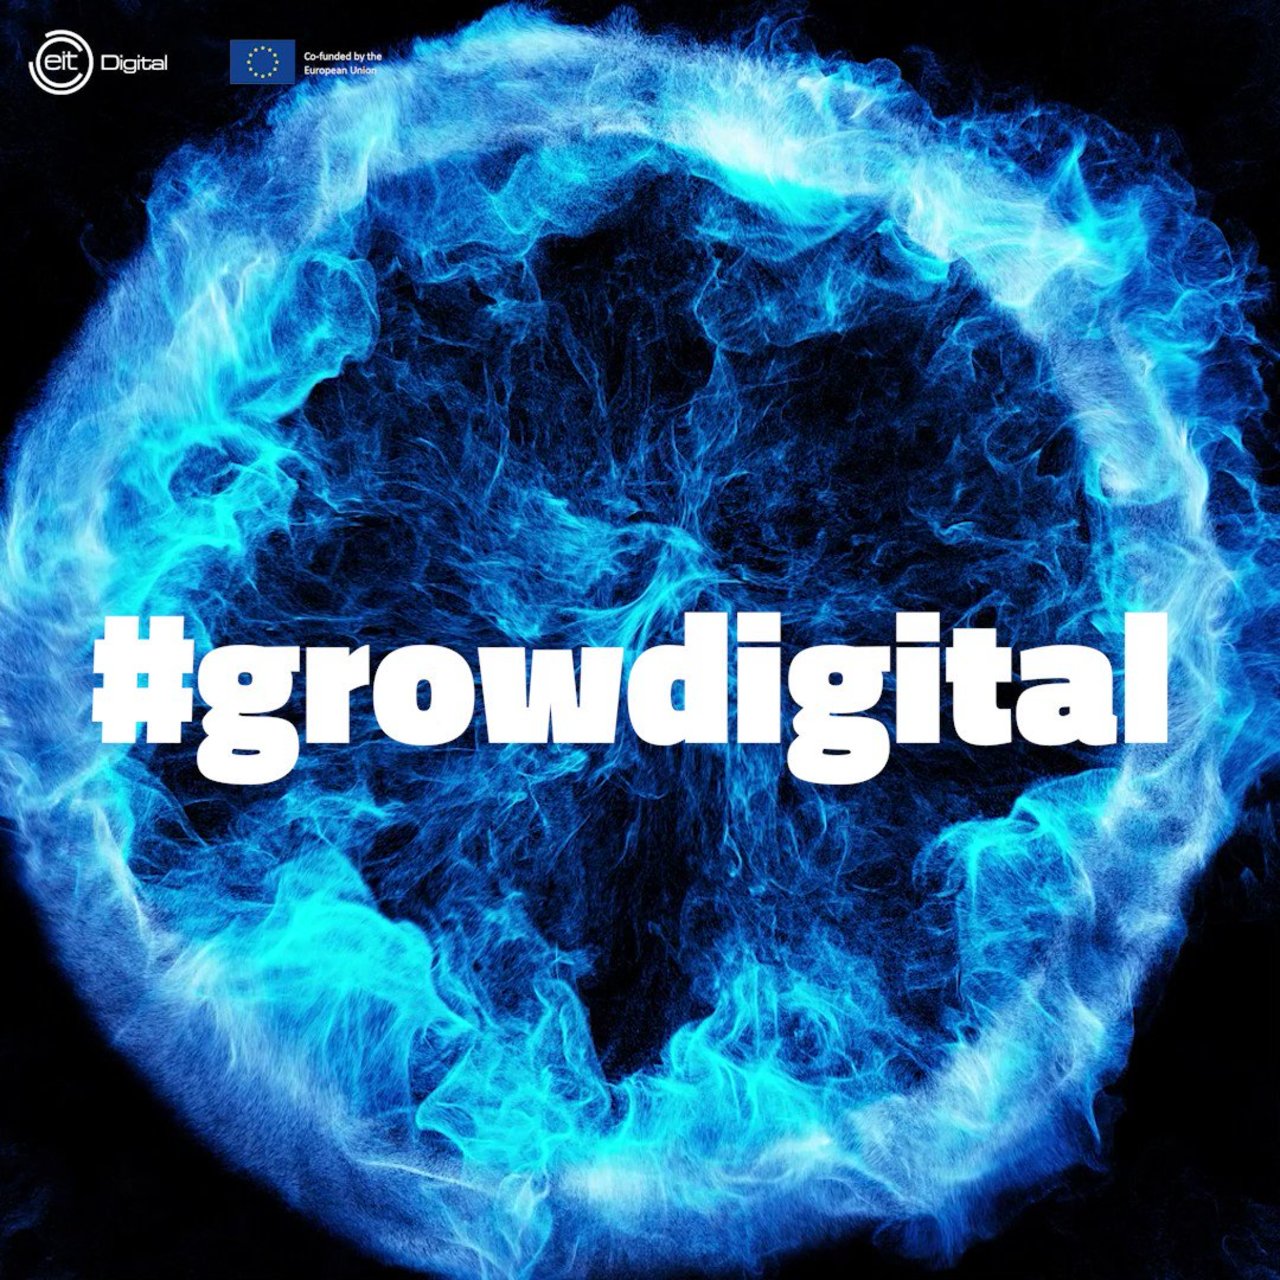 #GrowDigital EIT Digital’s flagship conference on Cybersecurity, Quantum Computing, Metaverse and Green Digital kicks off today. Follow this thread! All info about the speakers https://okt.to/n8B1i7 #eitdigital #innovation #techconference #greendigital #cybersecurity https://t.co/aIVfqutW6N